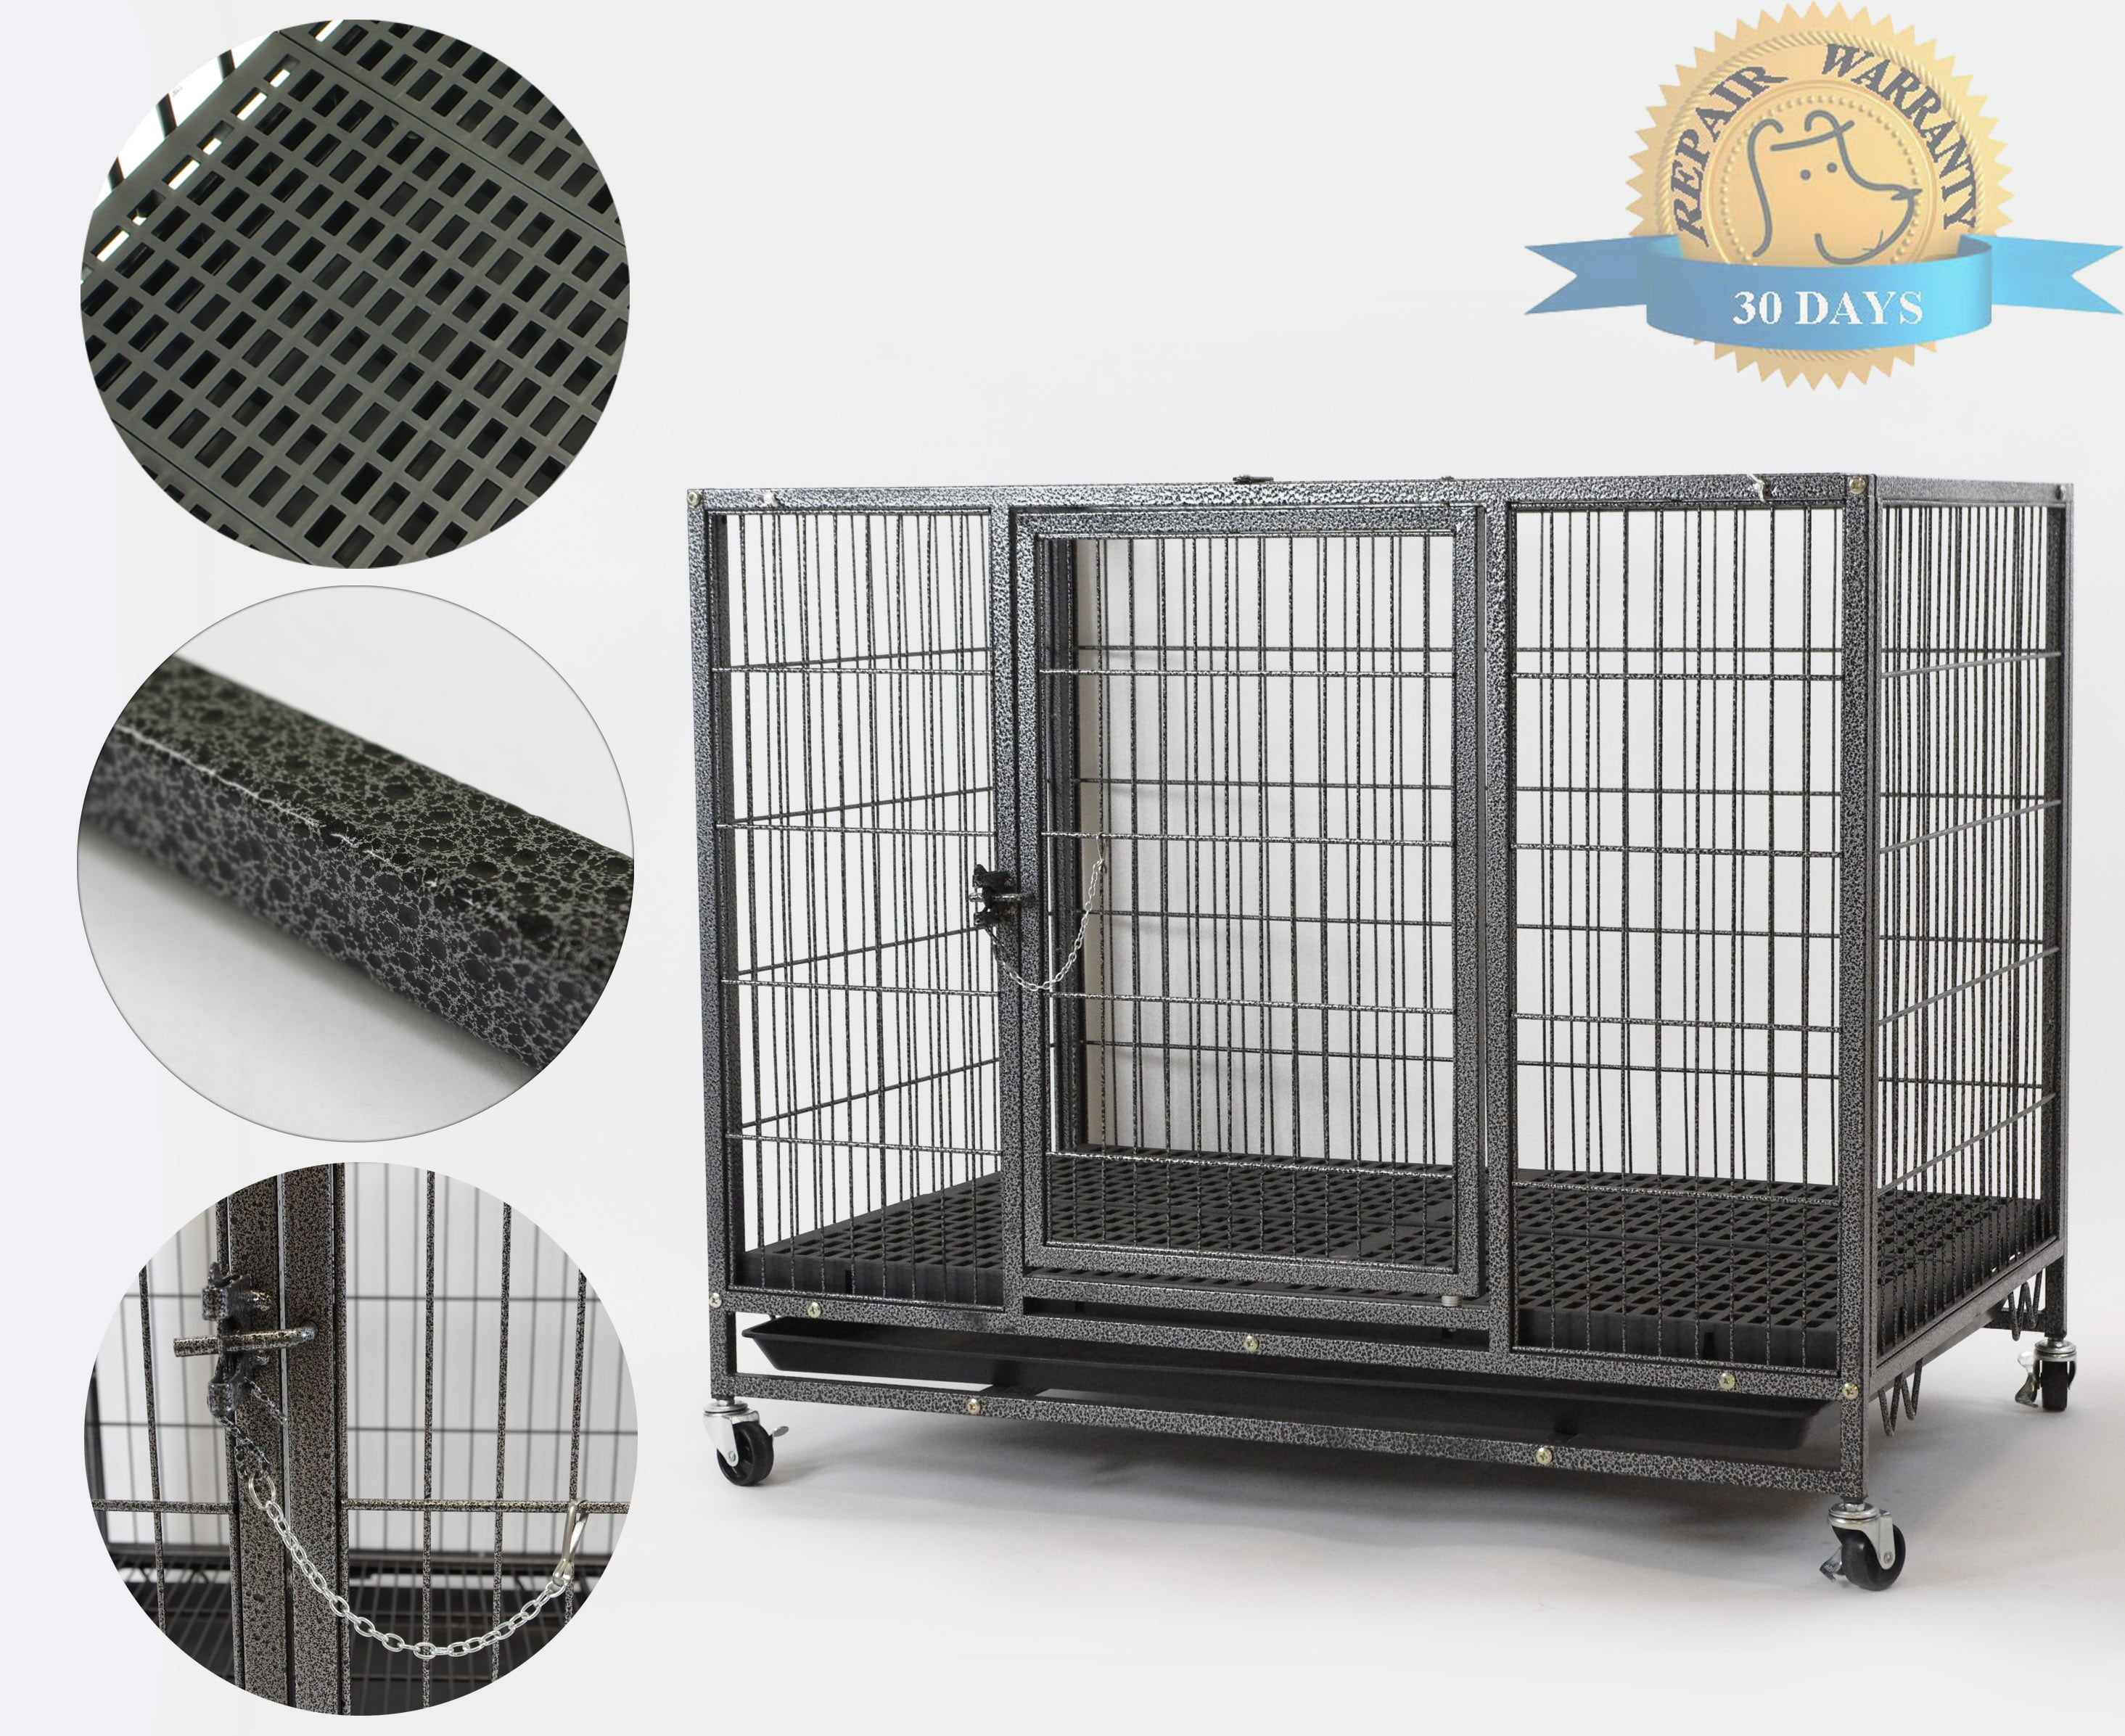 New 37" Homey Pet Metal Heavy Duty Dog Cat Cage Crate Kennel w Plastic Flooring 